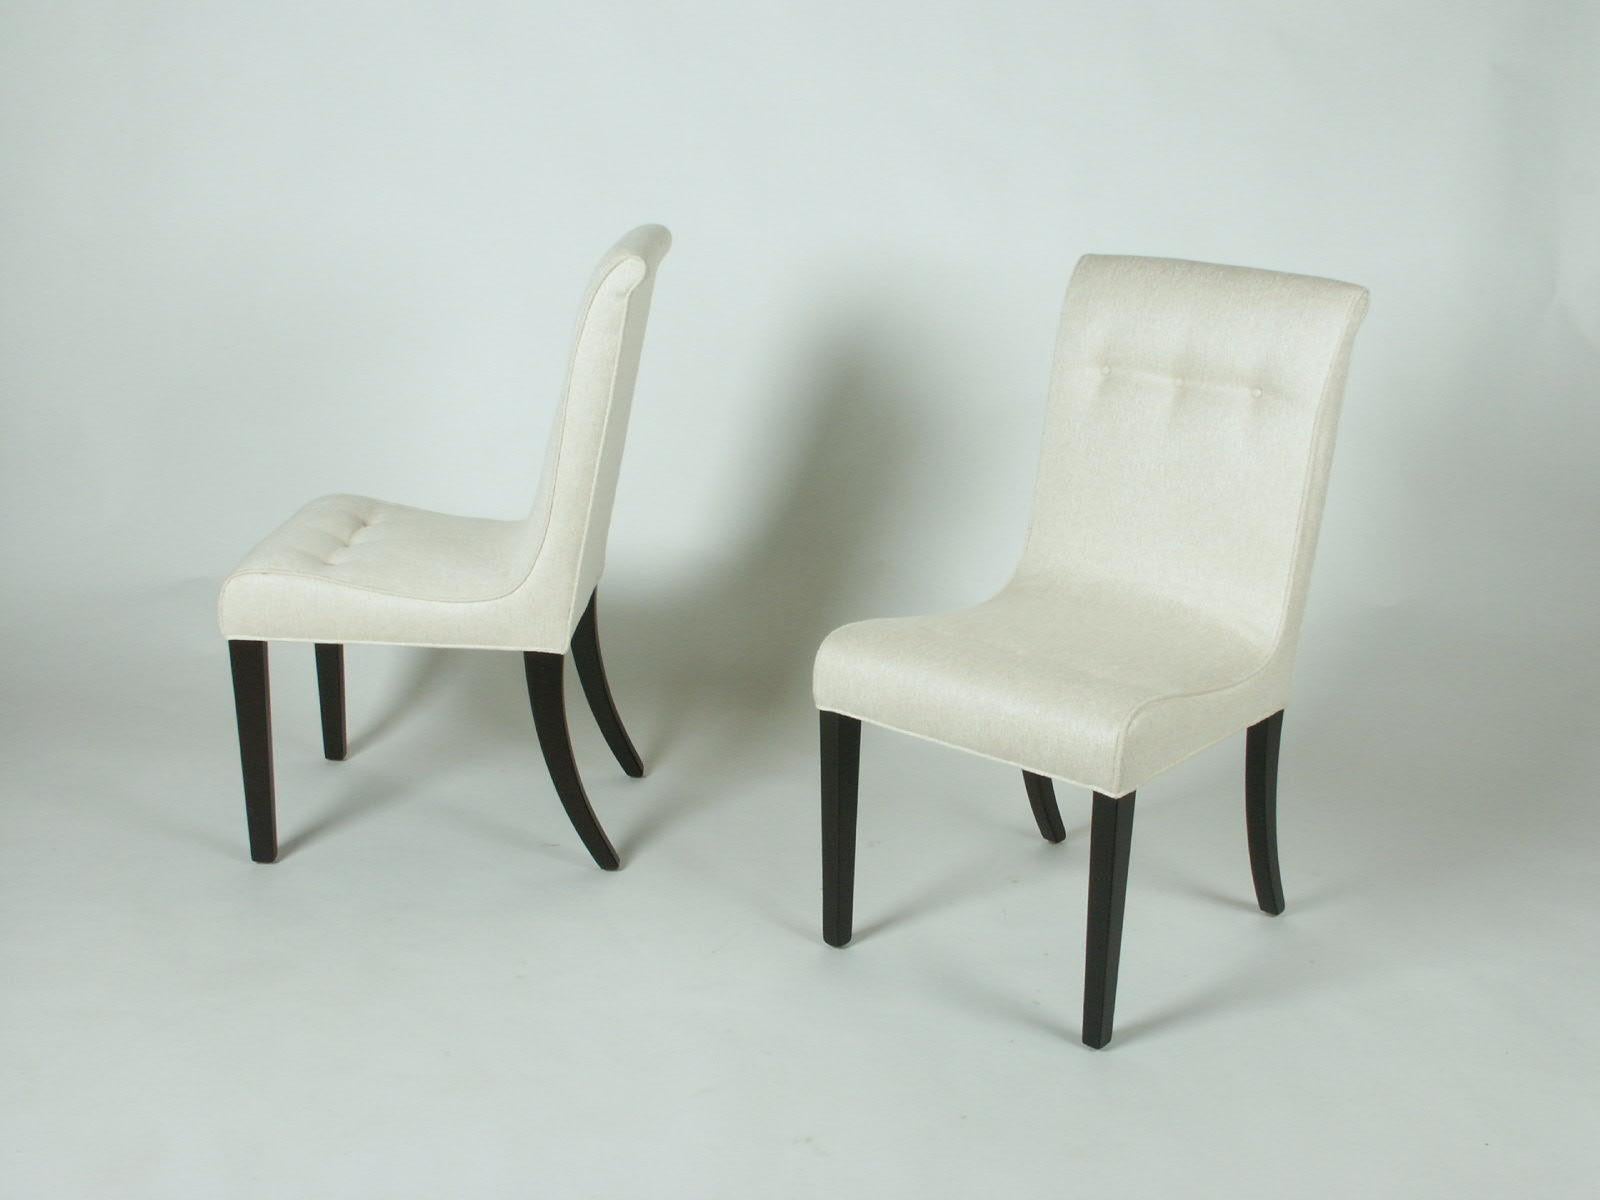 Upholstery 1940s Edward Wormley for Dunbar Set of Four Side Chairs